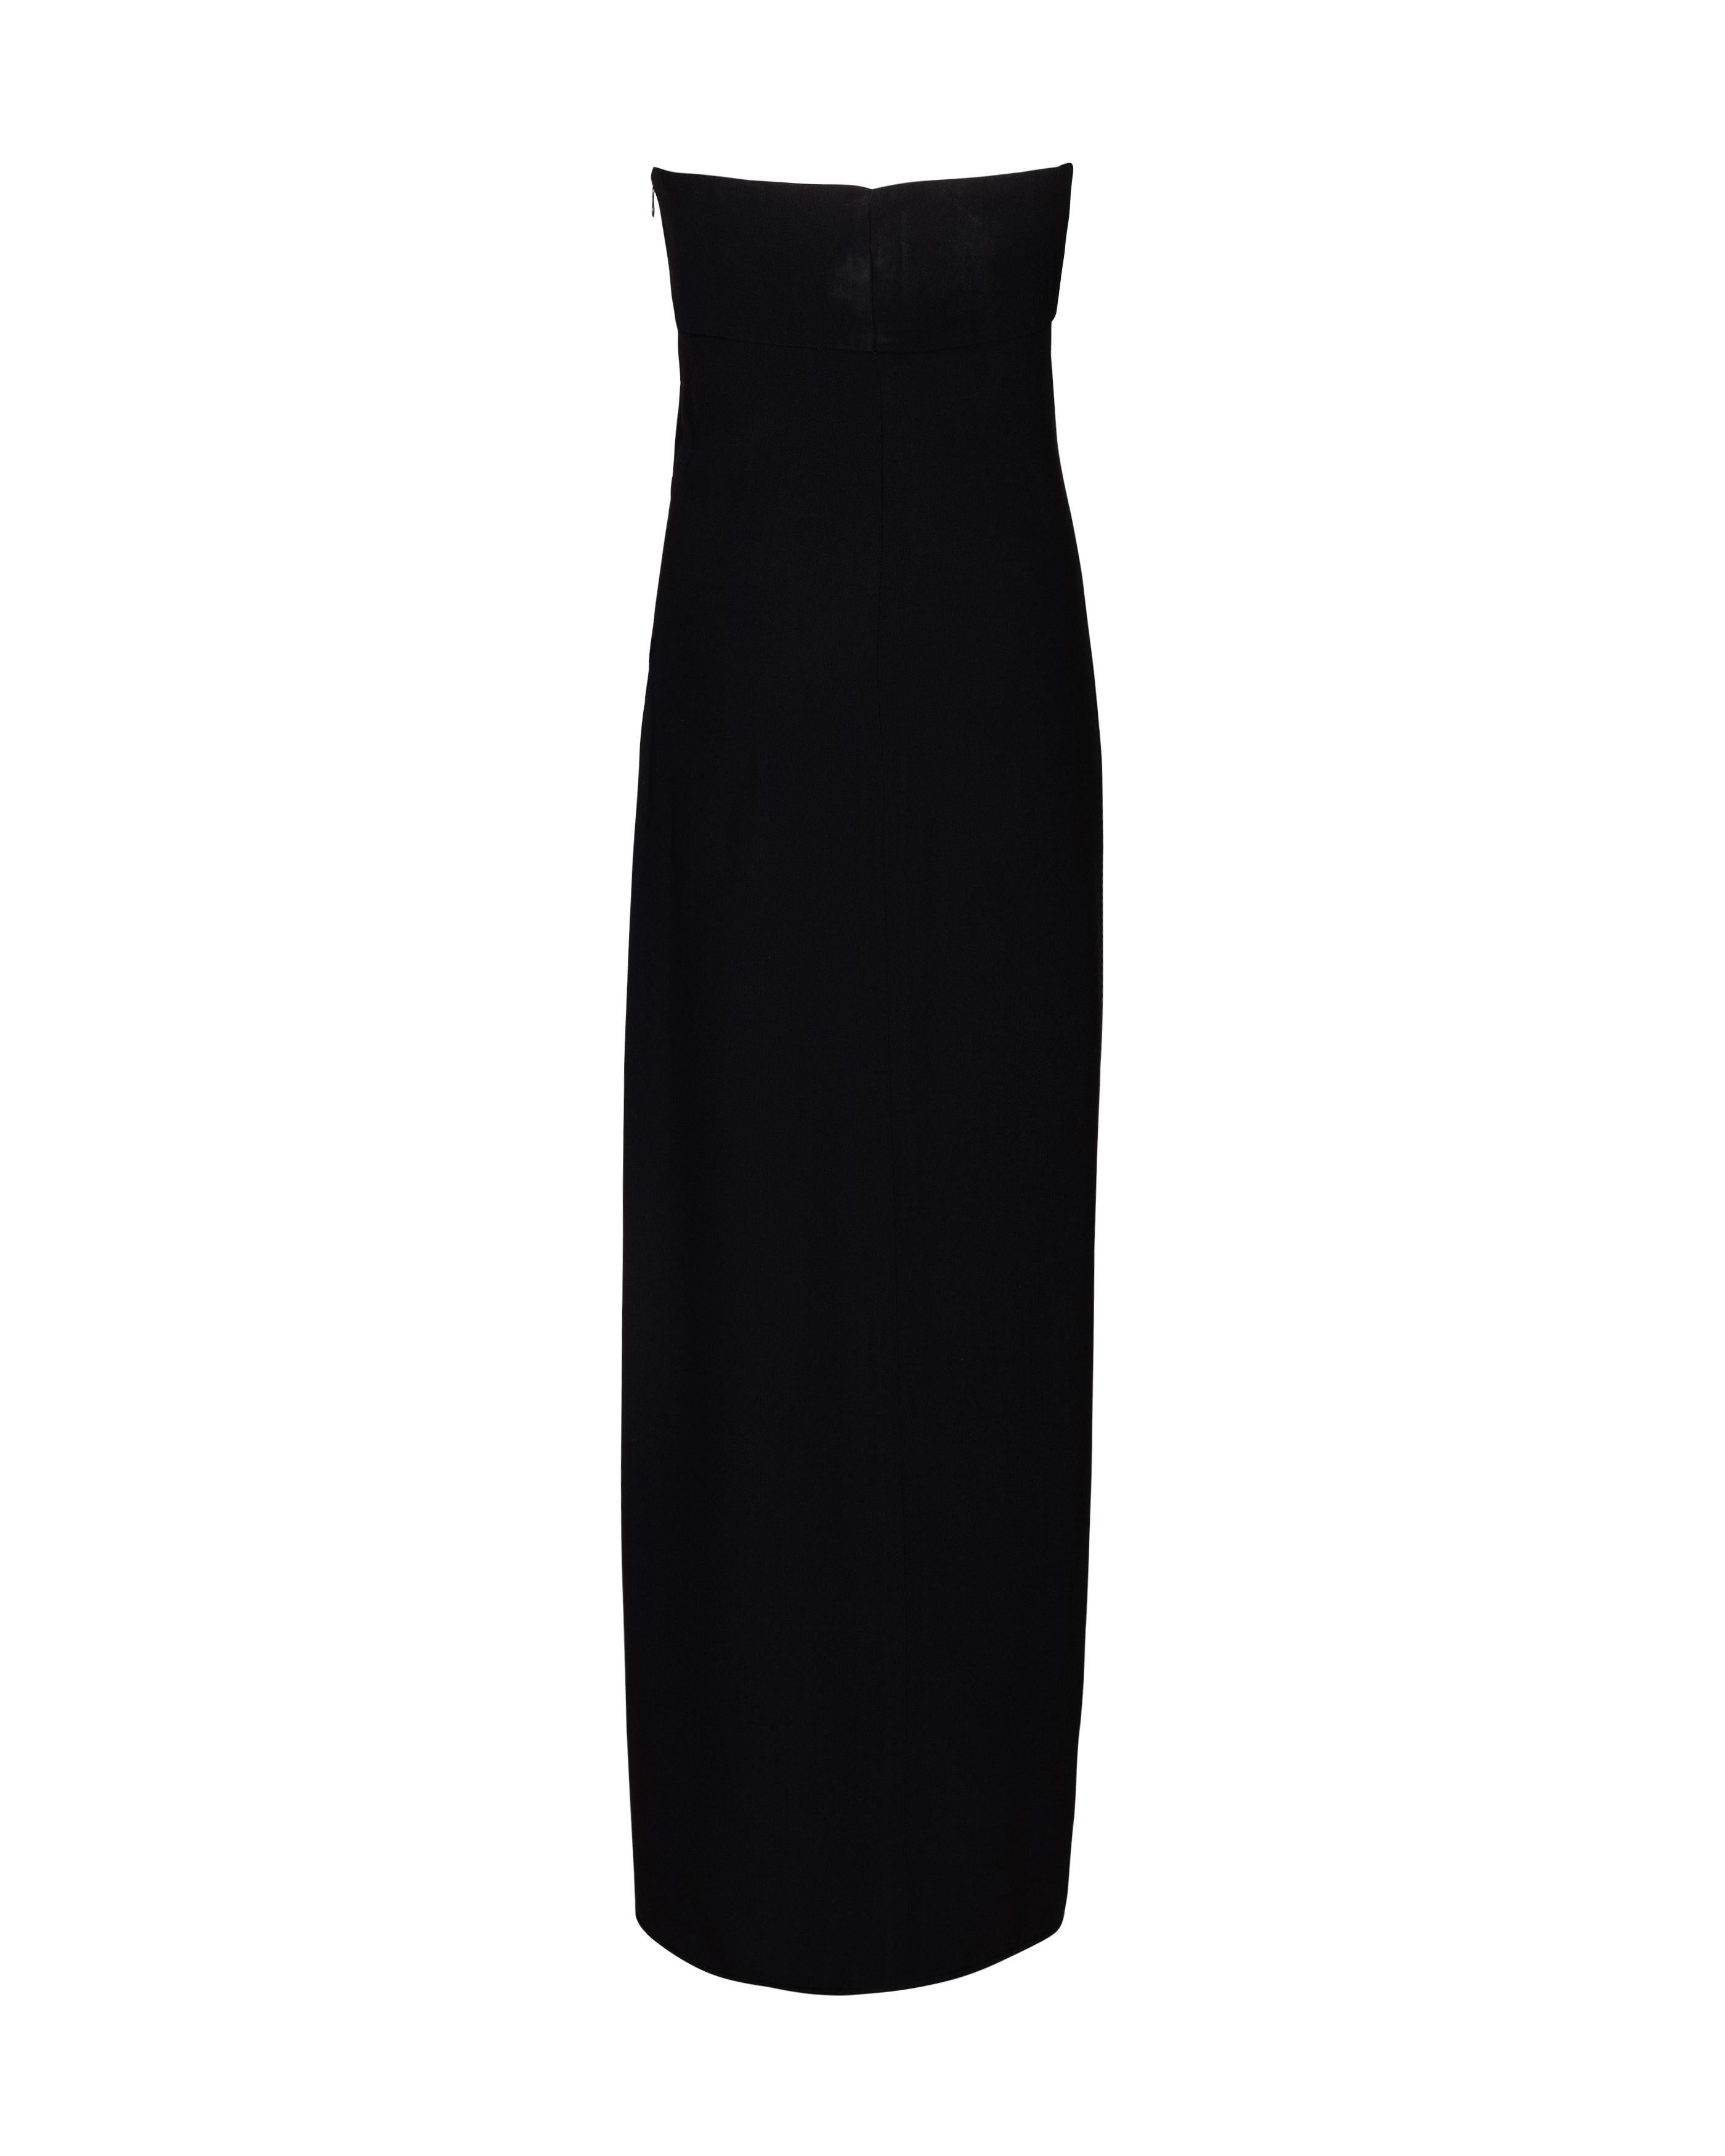 S/S 2000 Valentino Black Strapless Gown with Open Bust For Sale 1